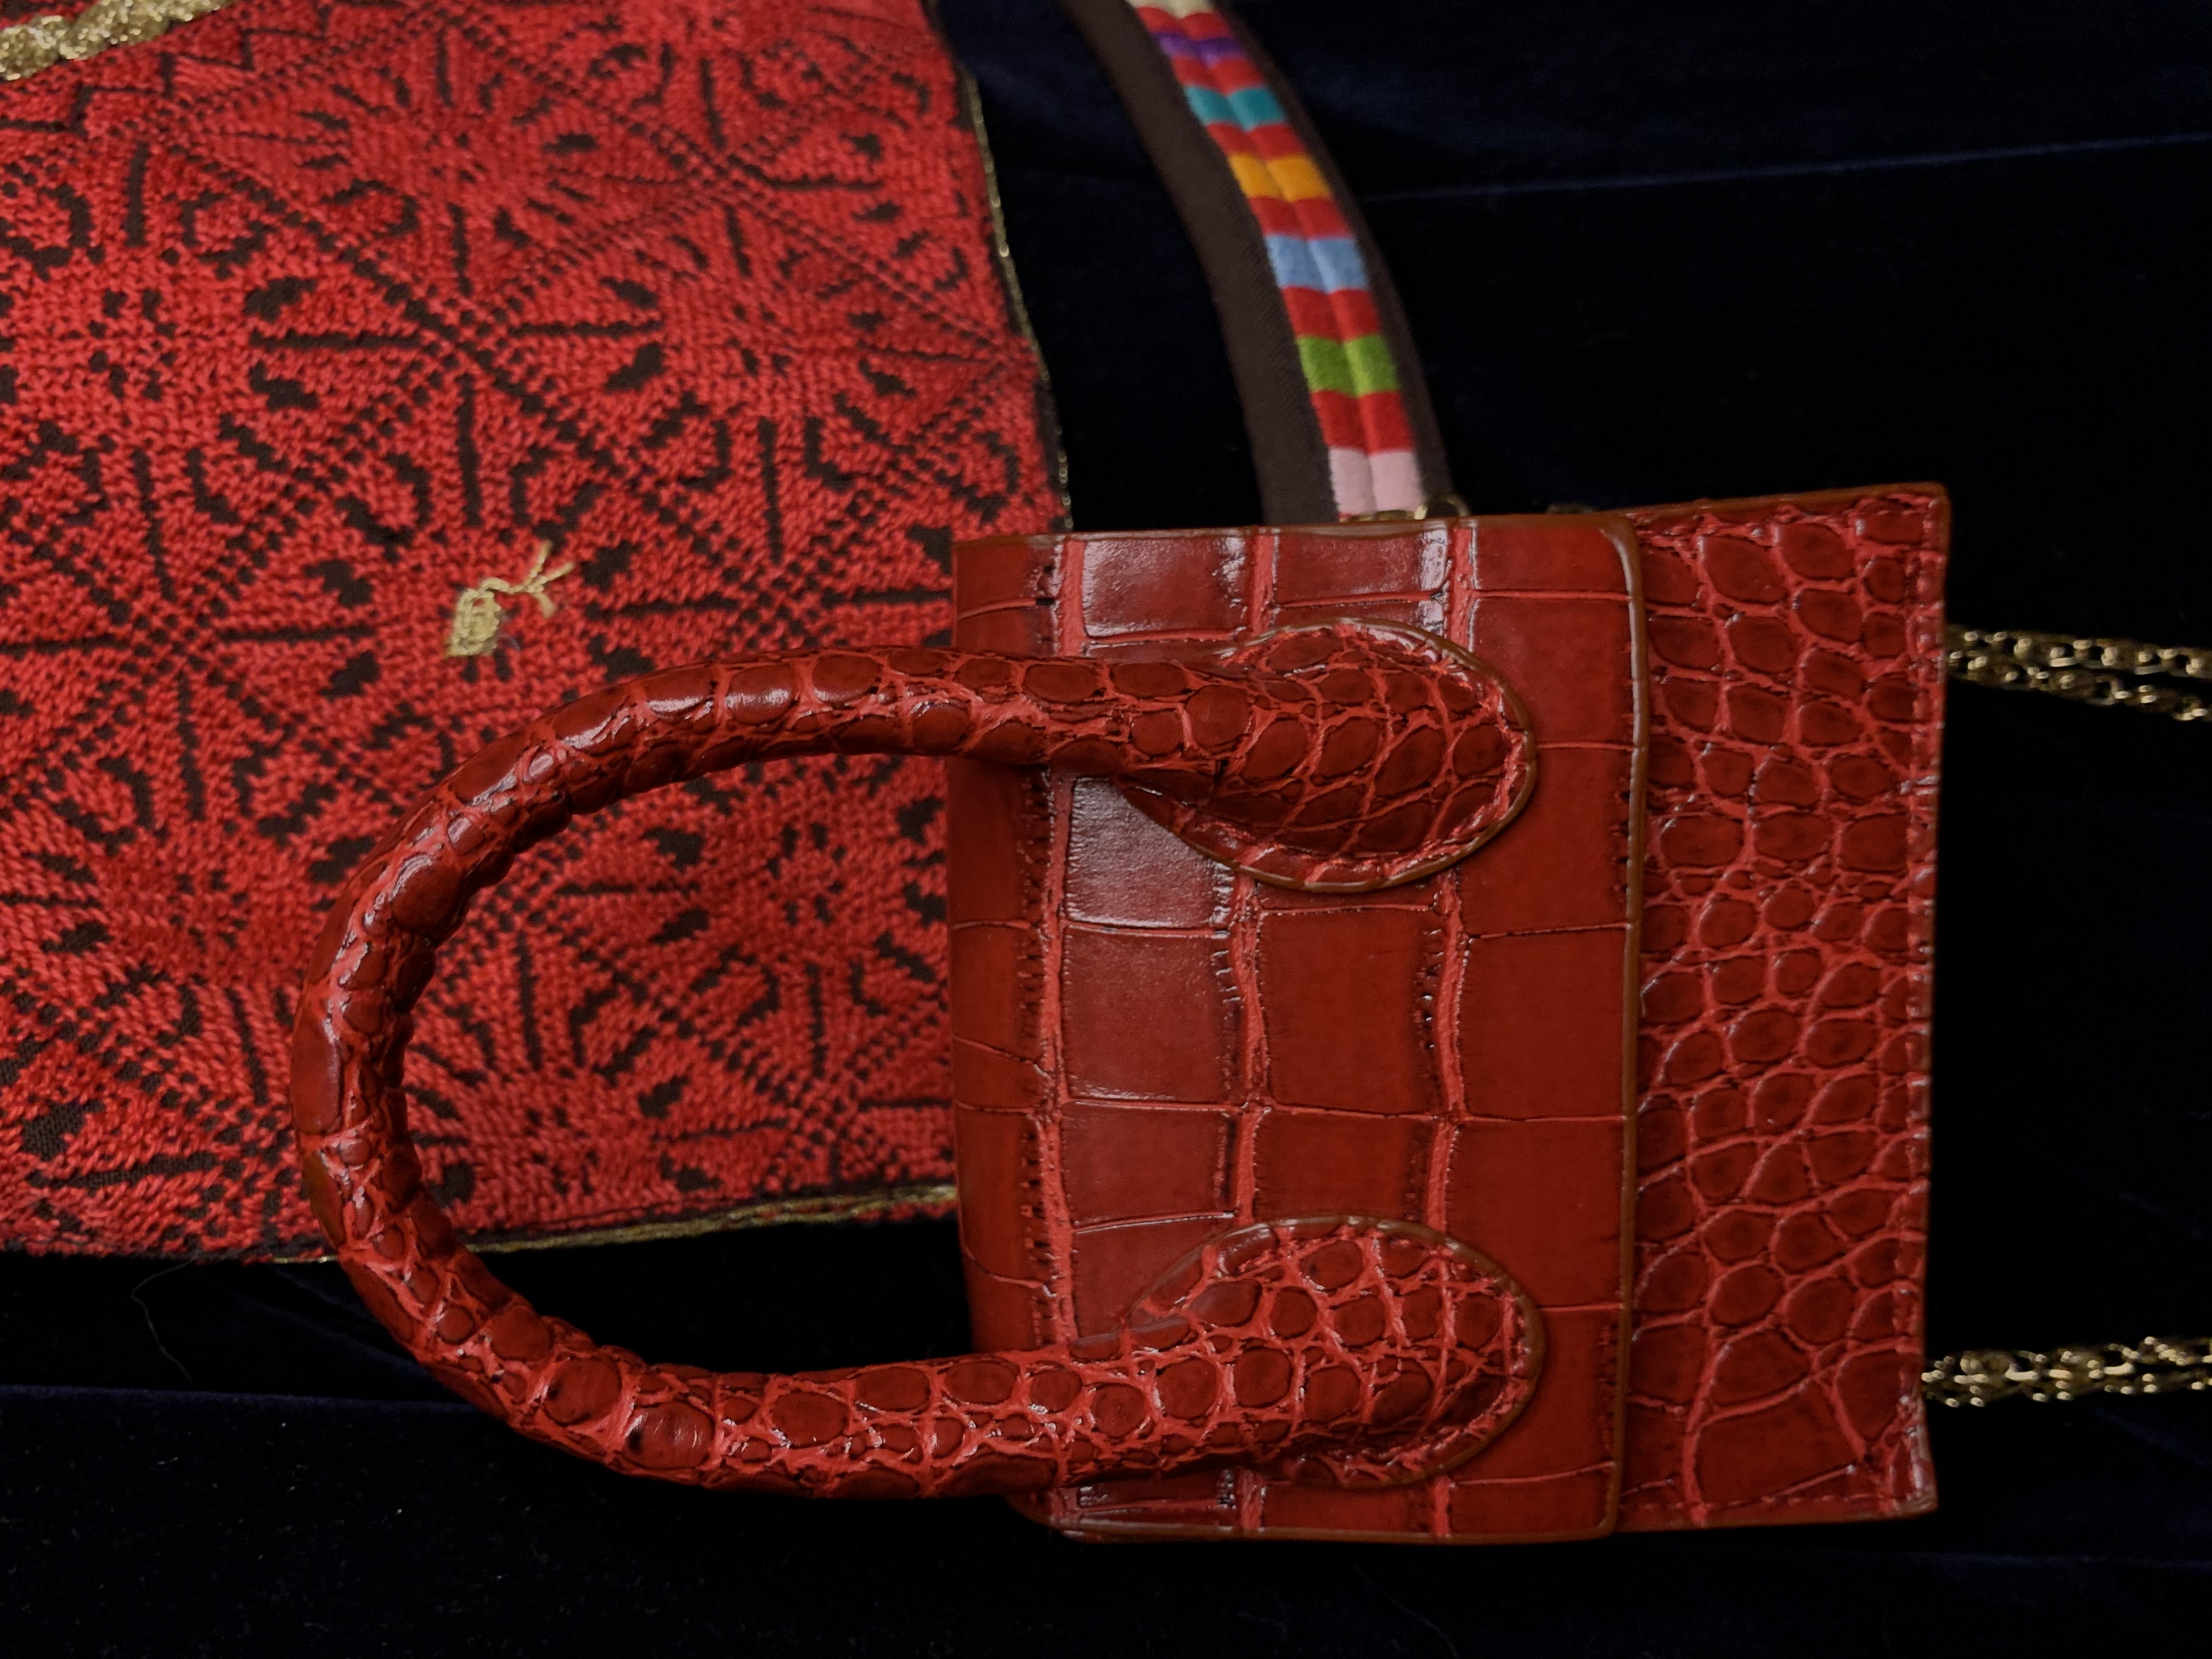 Embroidered multicolored belt with a small bag